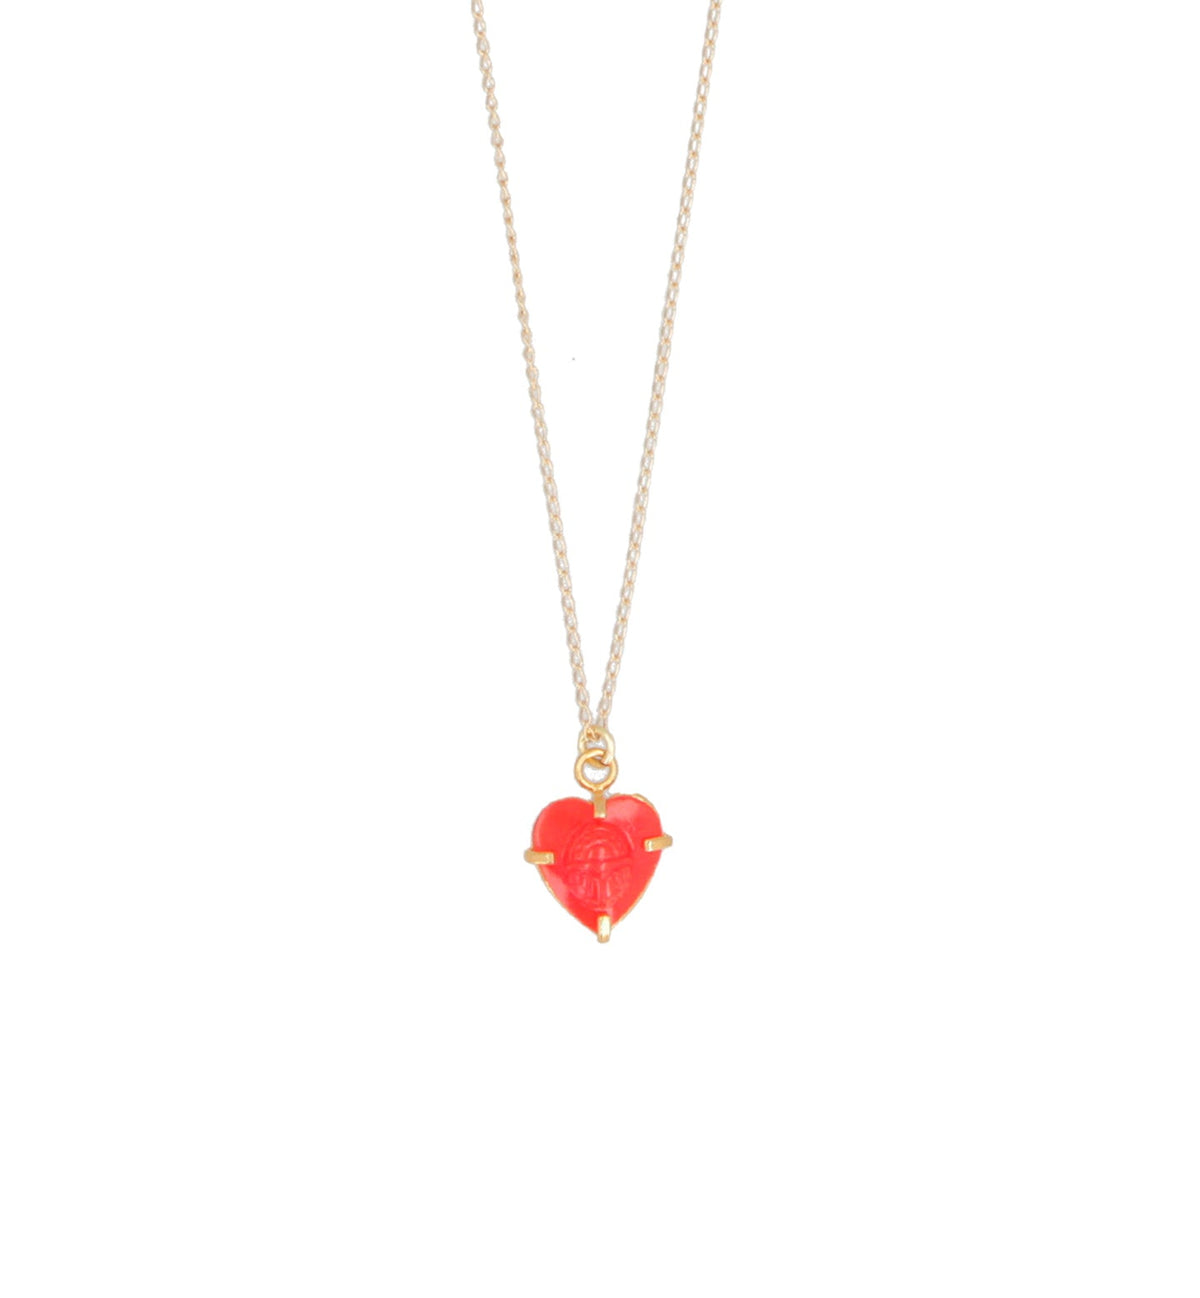 Astral Love Necklace